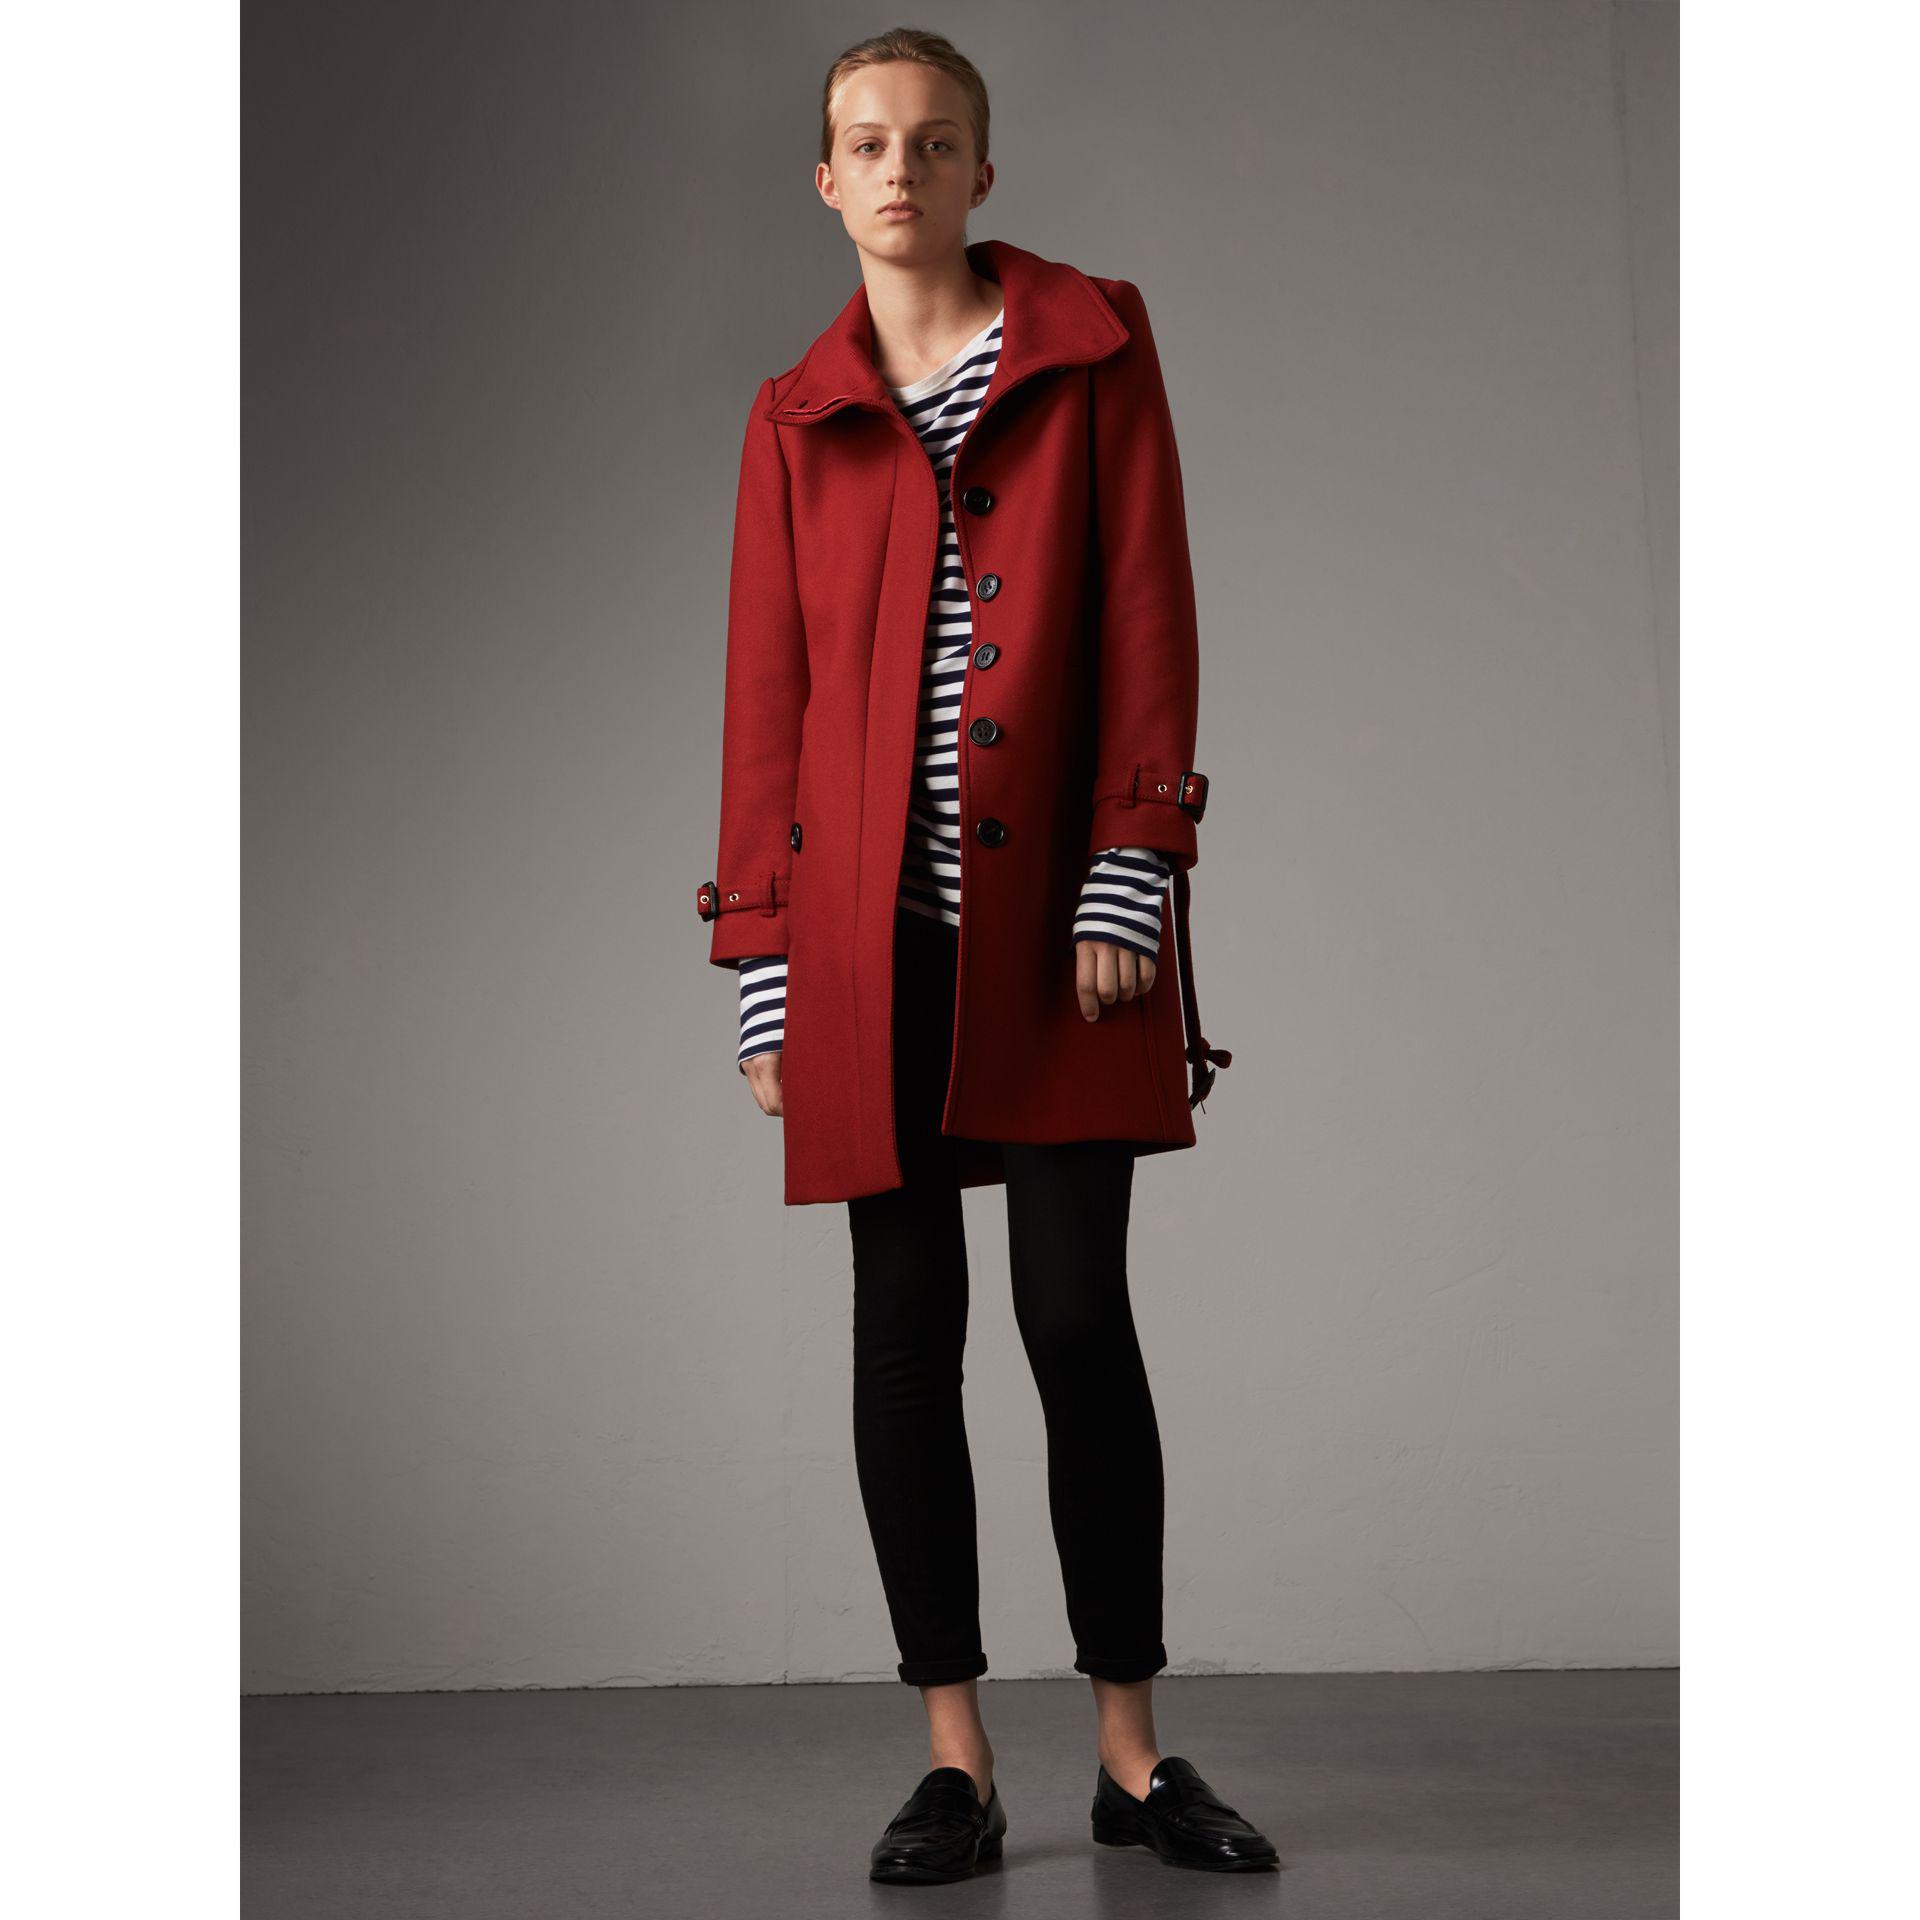 burberry red cashmere coat